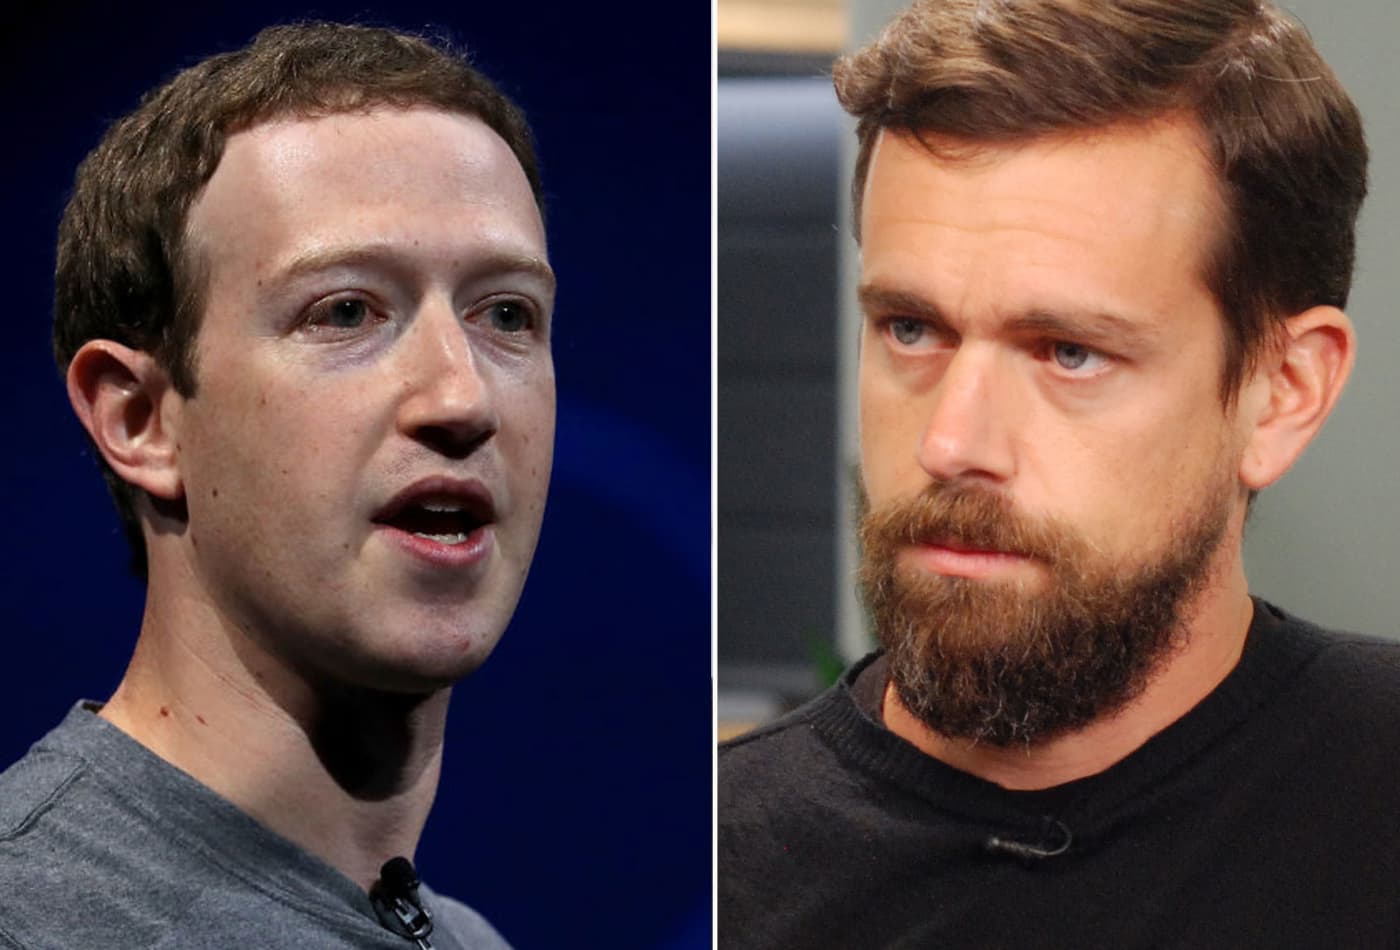 Mark Zuckerberg and Jack Dorsey Return to Congress to Talk About the Election